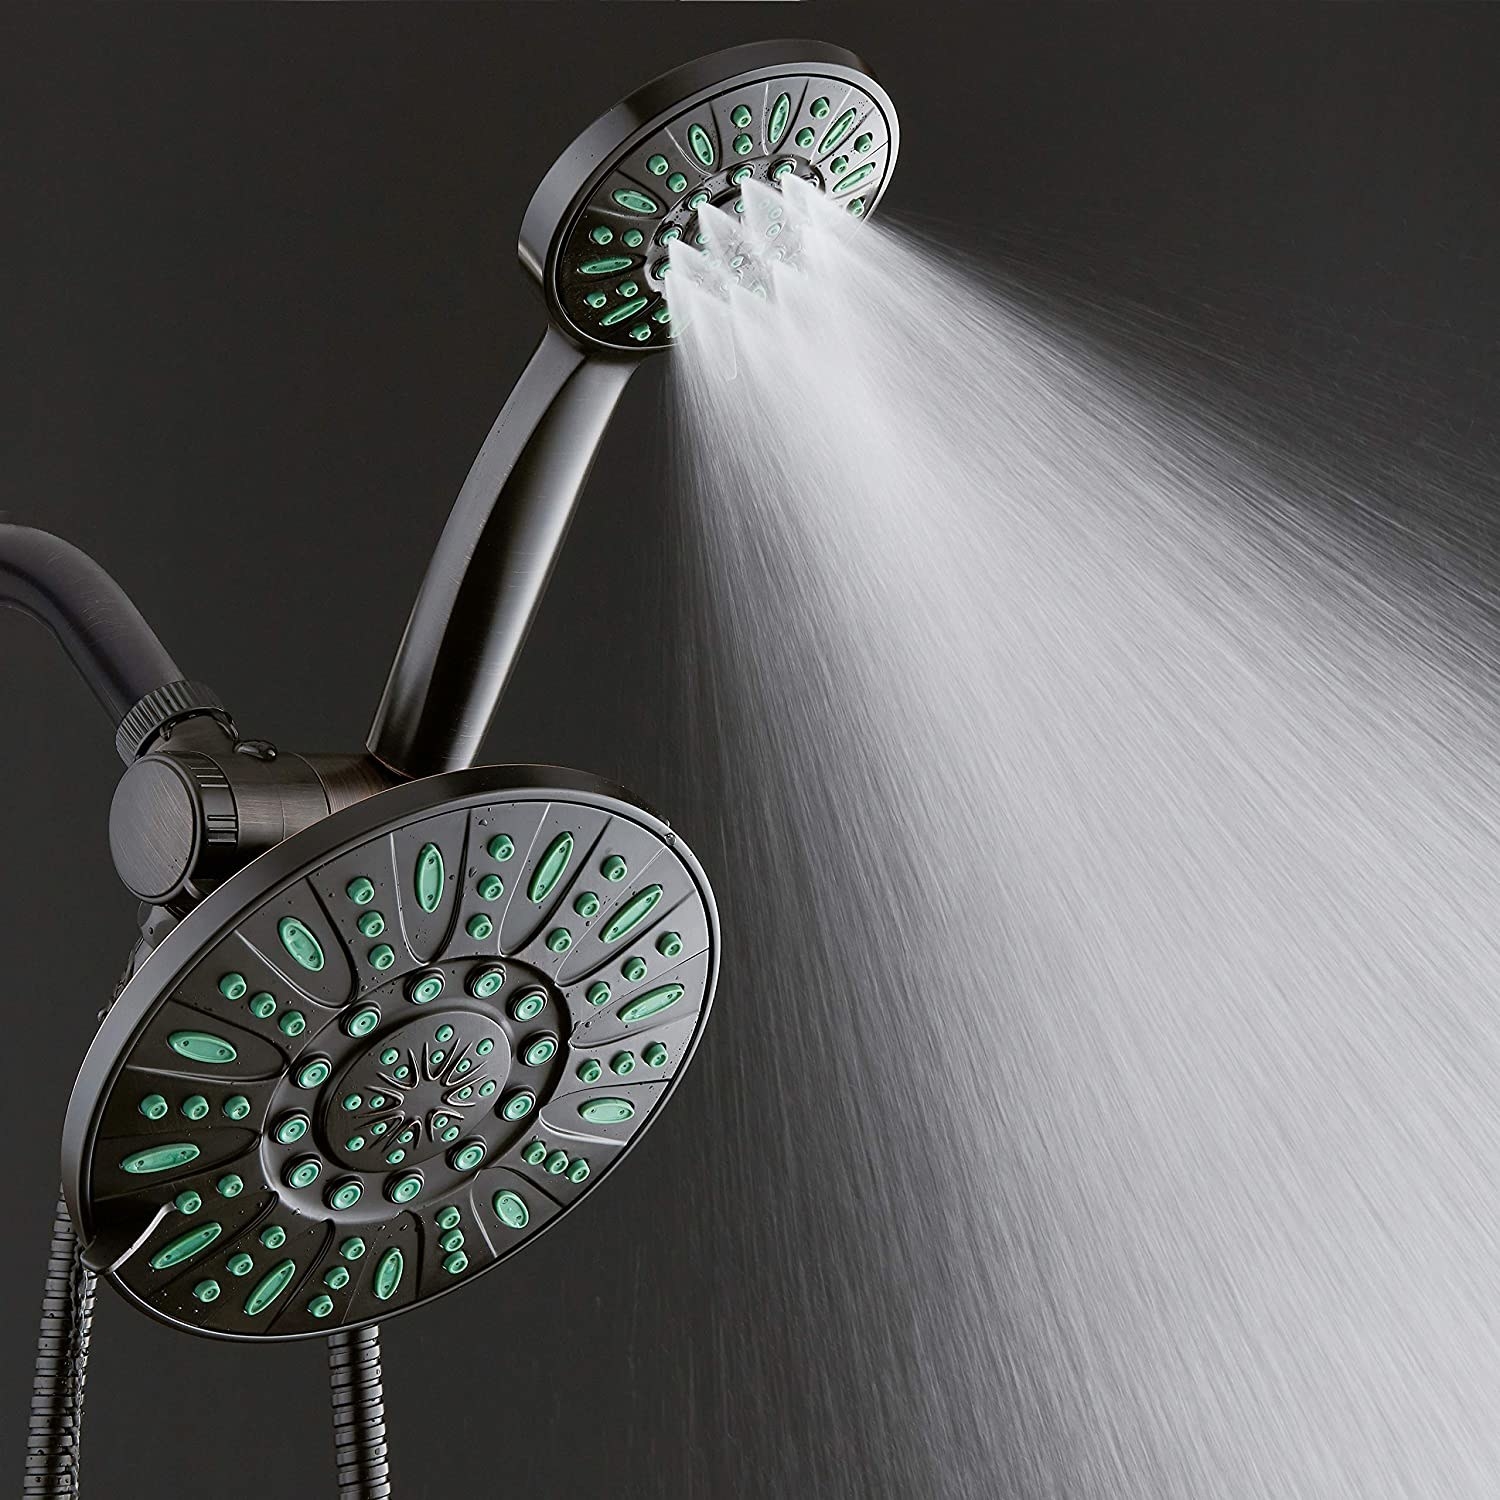 Double shower head with mist setting on the top 